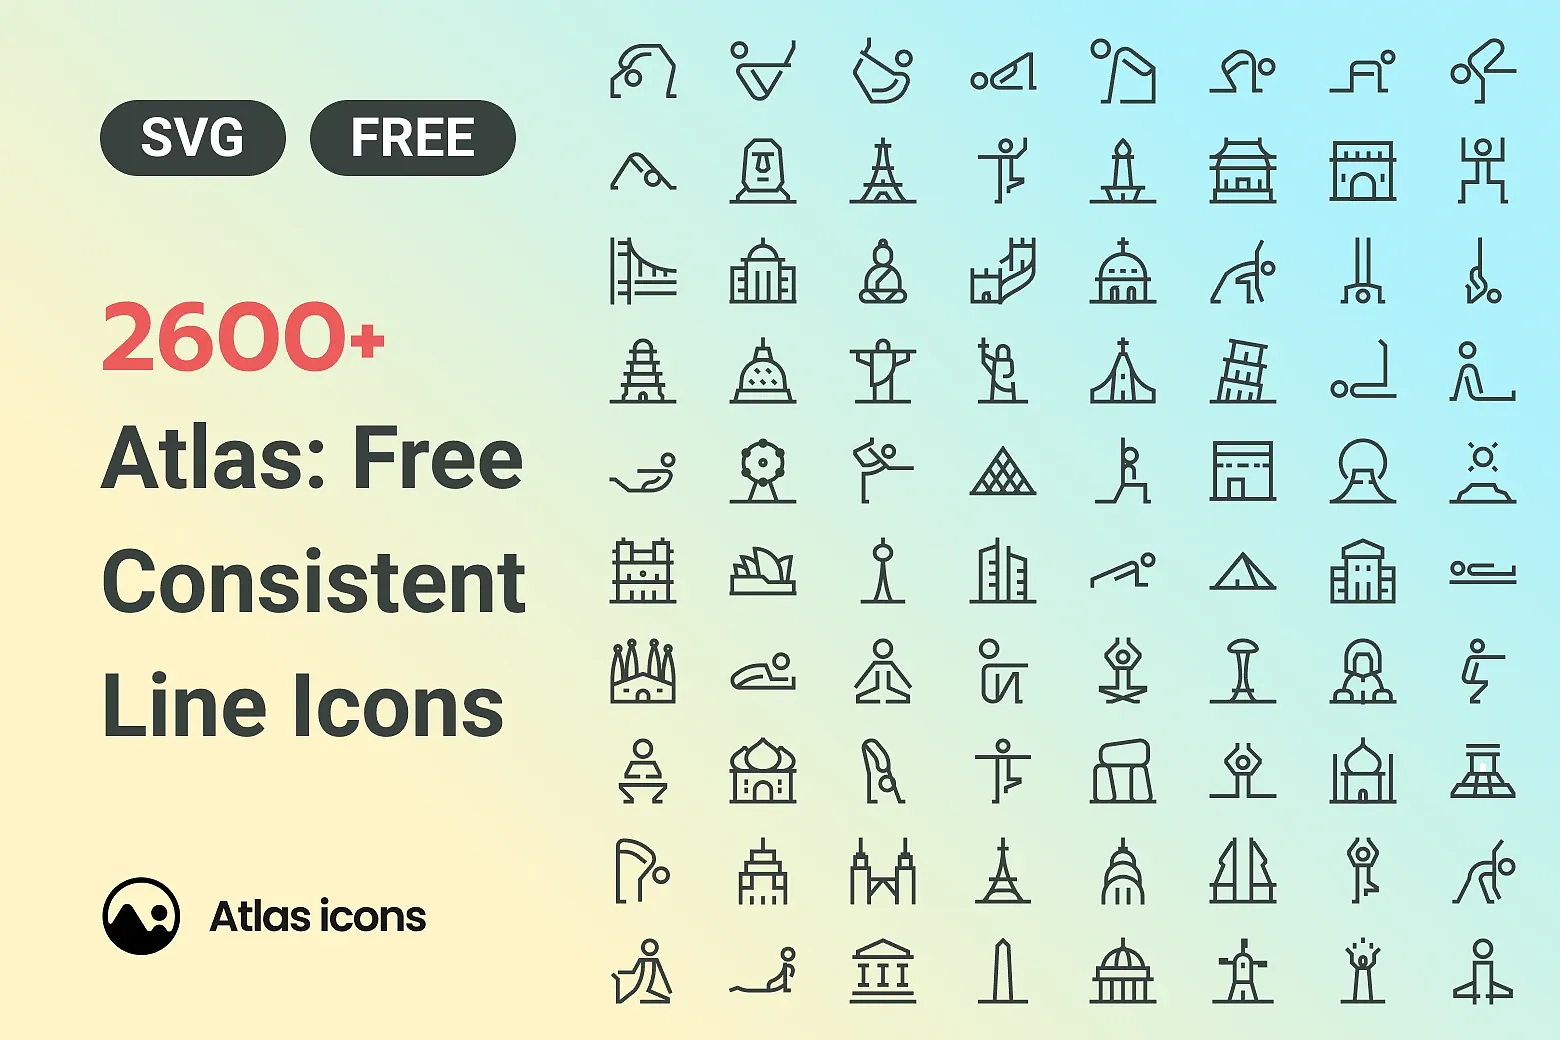 2,600+ Top Seller Stock Illustrations, Royalty-Free Vector